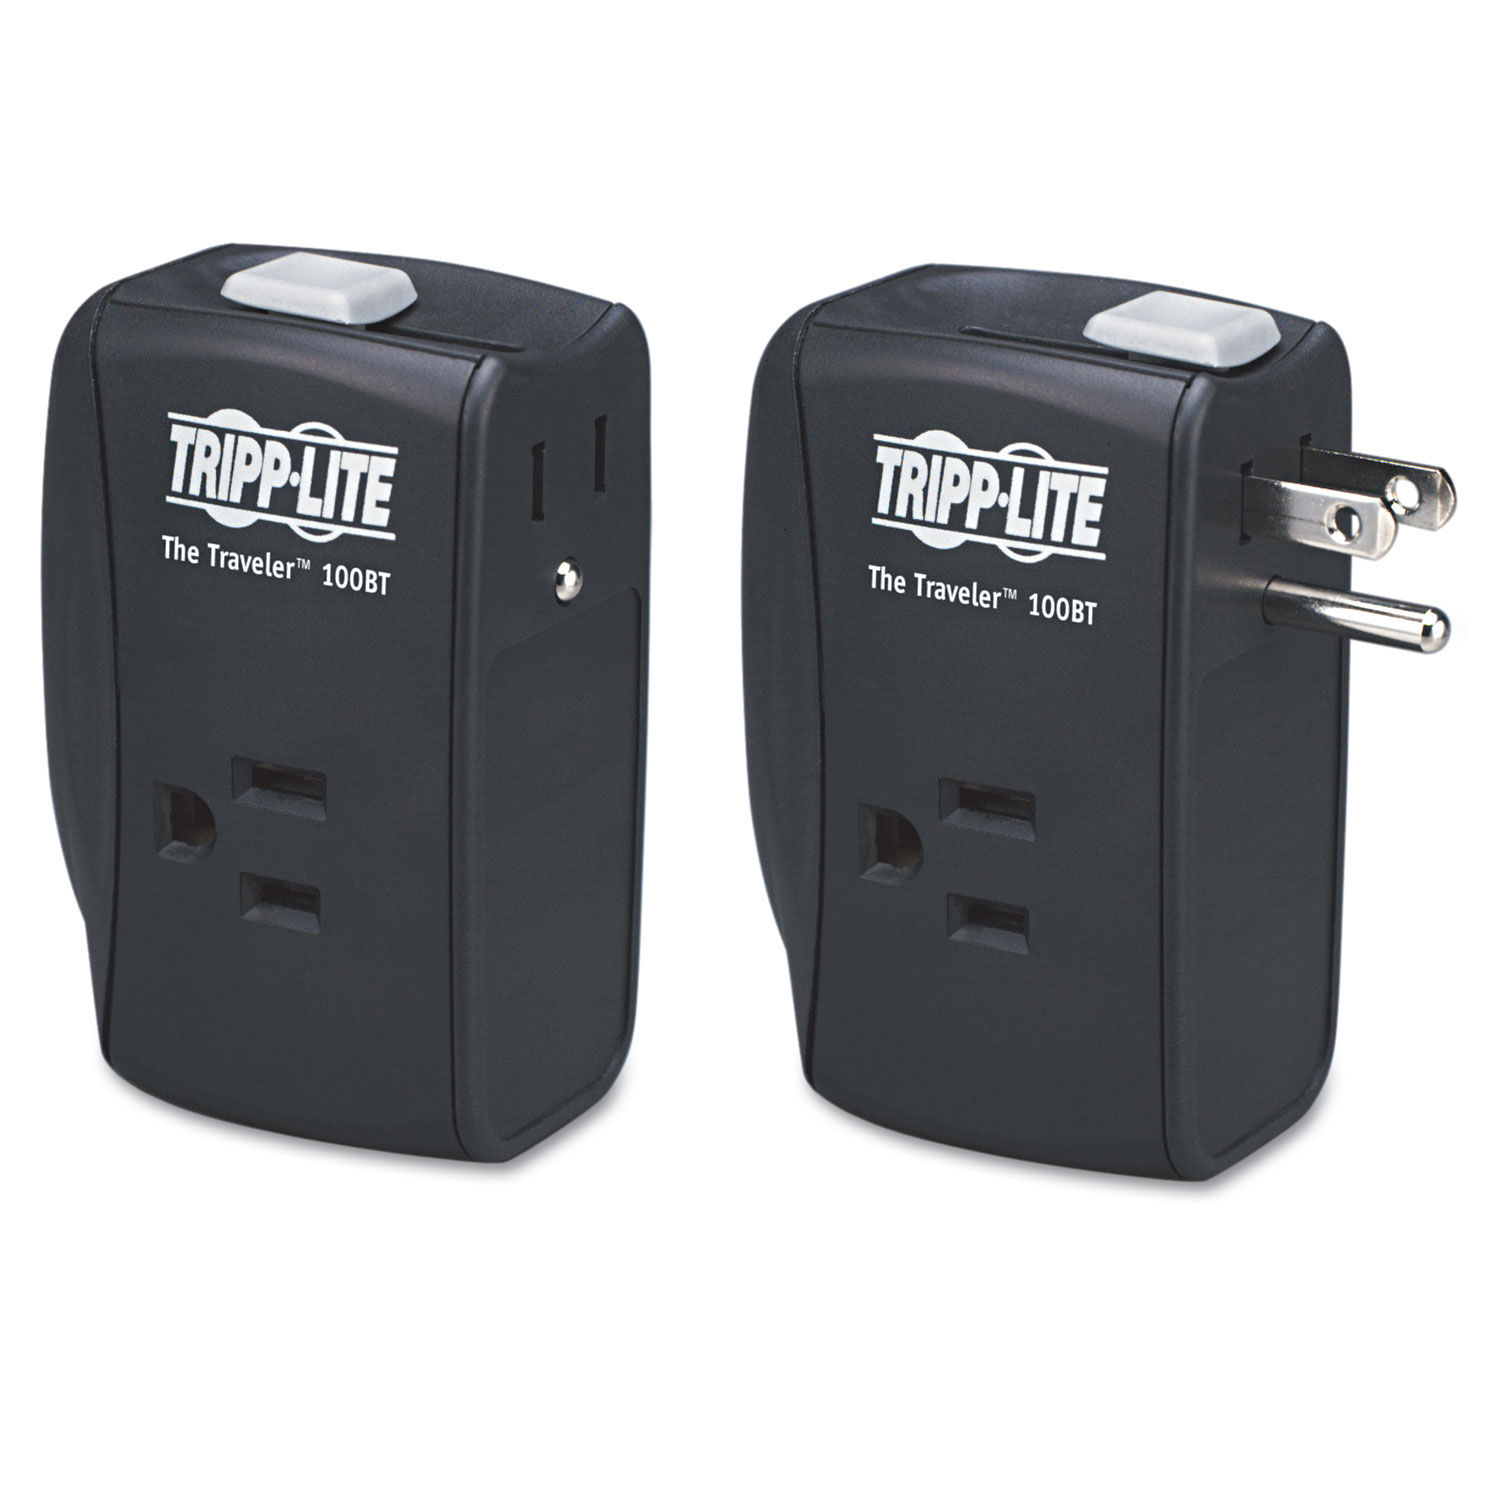 Protect It! Portable Surge Protector 2 AC Outlets, 1,050 J, Black